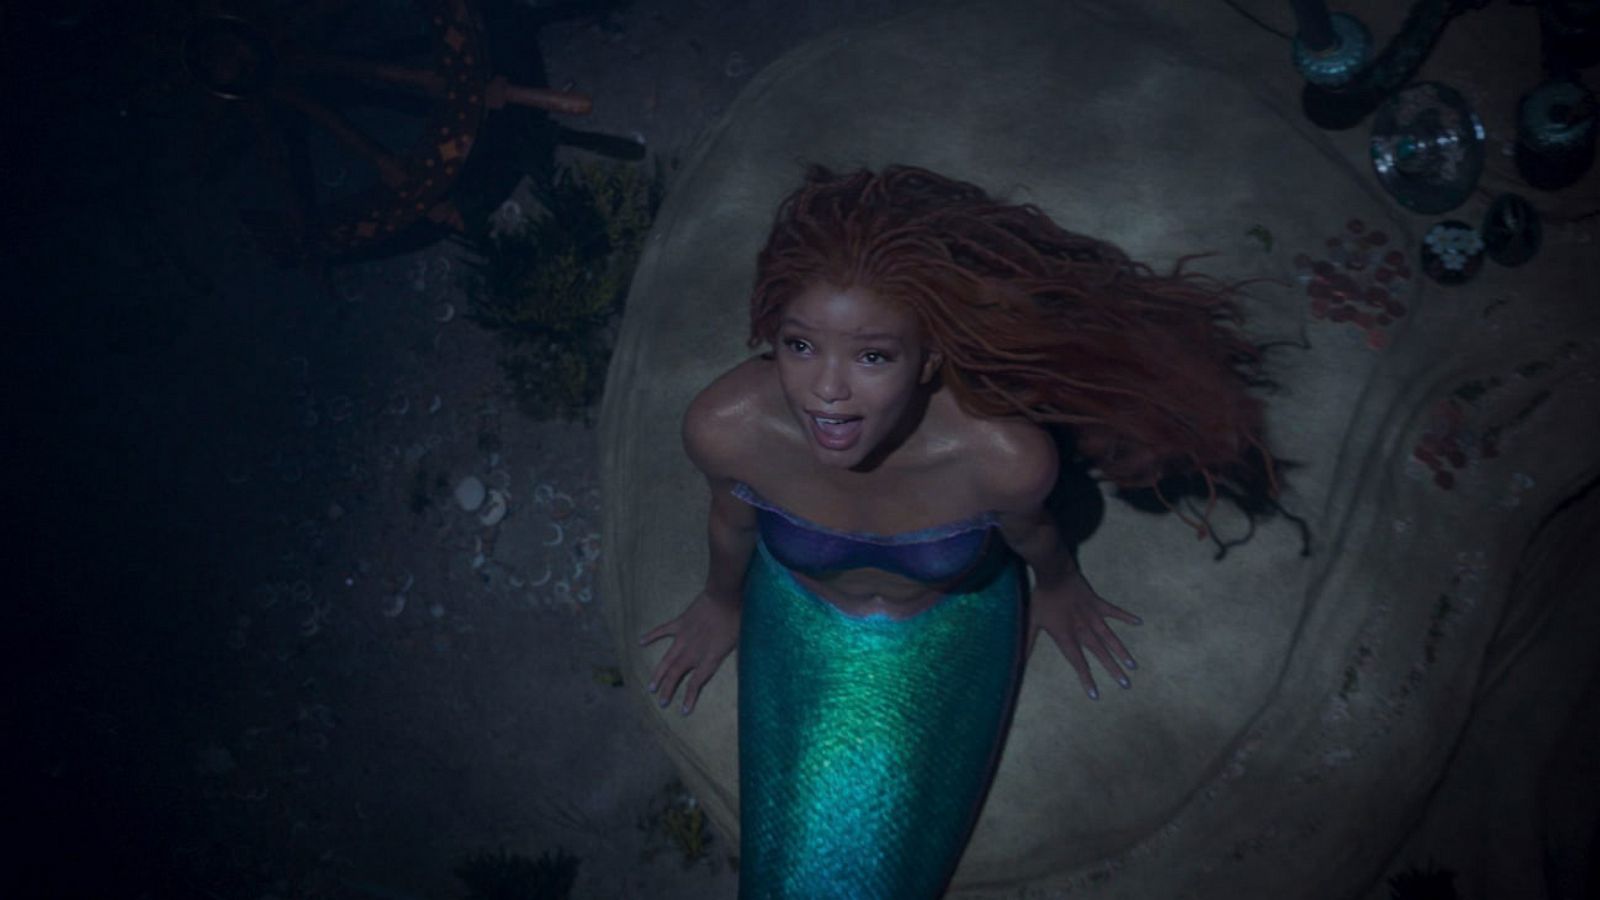 The Little Mermaid: Does Anyone Want to Be Part of this World? - That Park  Place